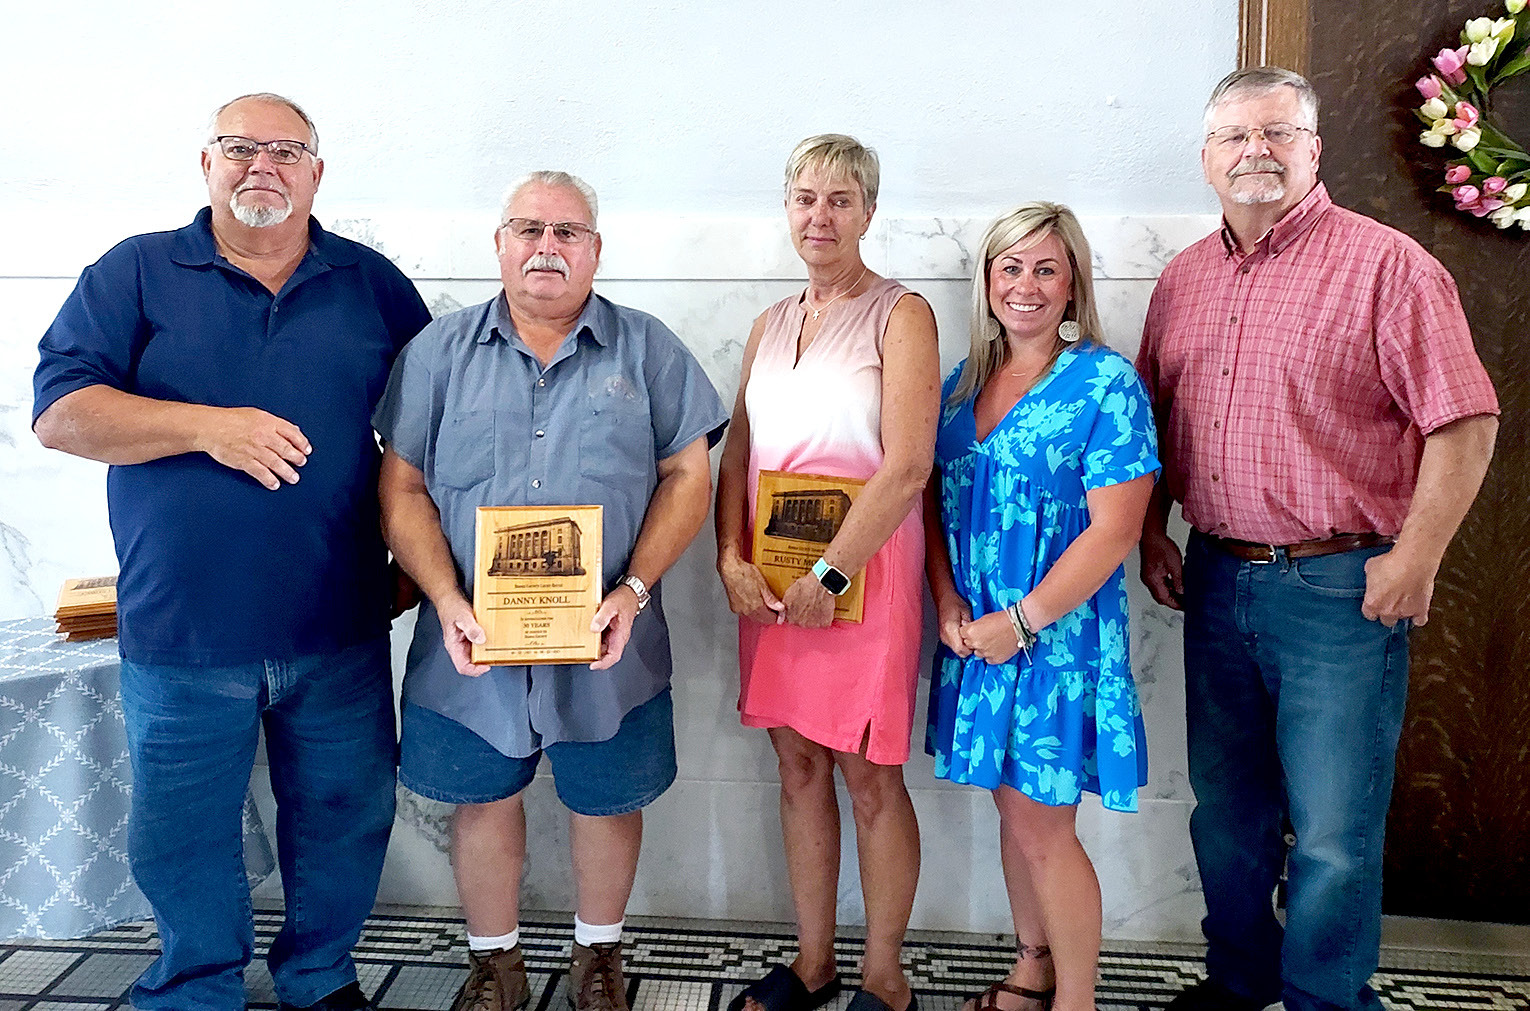 THIRTIETH ANNIVERSARY plaques were presented at the Rooks County Commission meeting held on Tuesday, May 30th. Pictured are (from left): commissioner Tim Berland, Danny Knoll, Tricia Morgan for Rusty Morgan, and commissioners Kayla Hilbrink and John Ruder. (Not pictured are Chris Lambert and Kelly Richmond. Gail Strutt was recognized for 40 years of service to the County.)